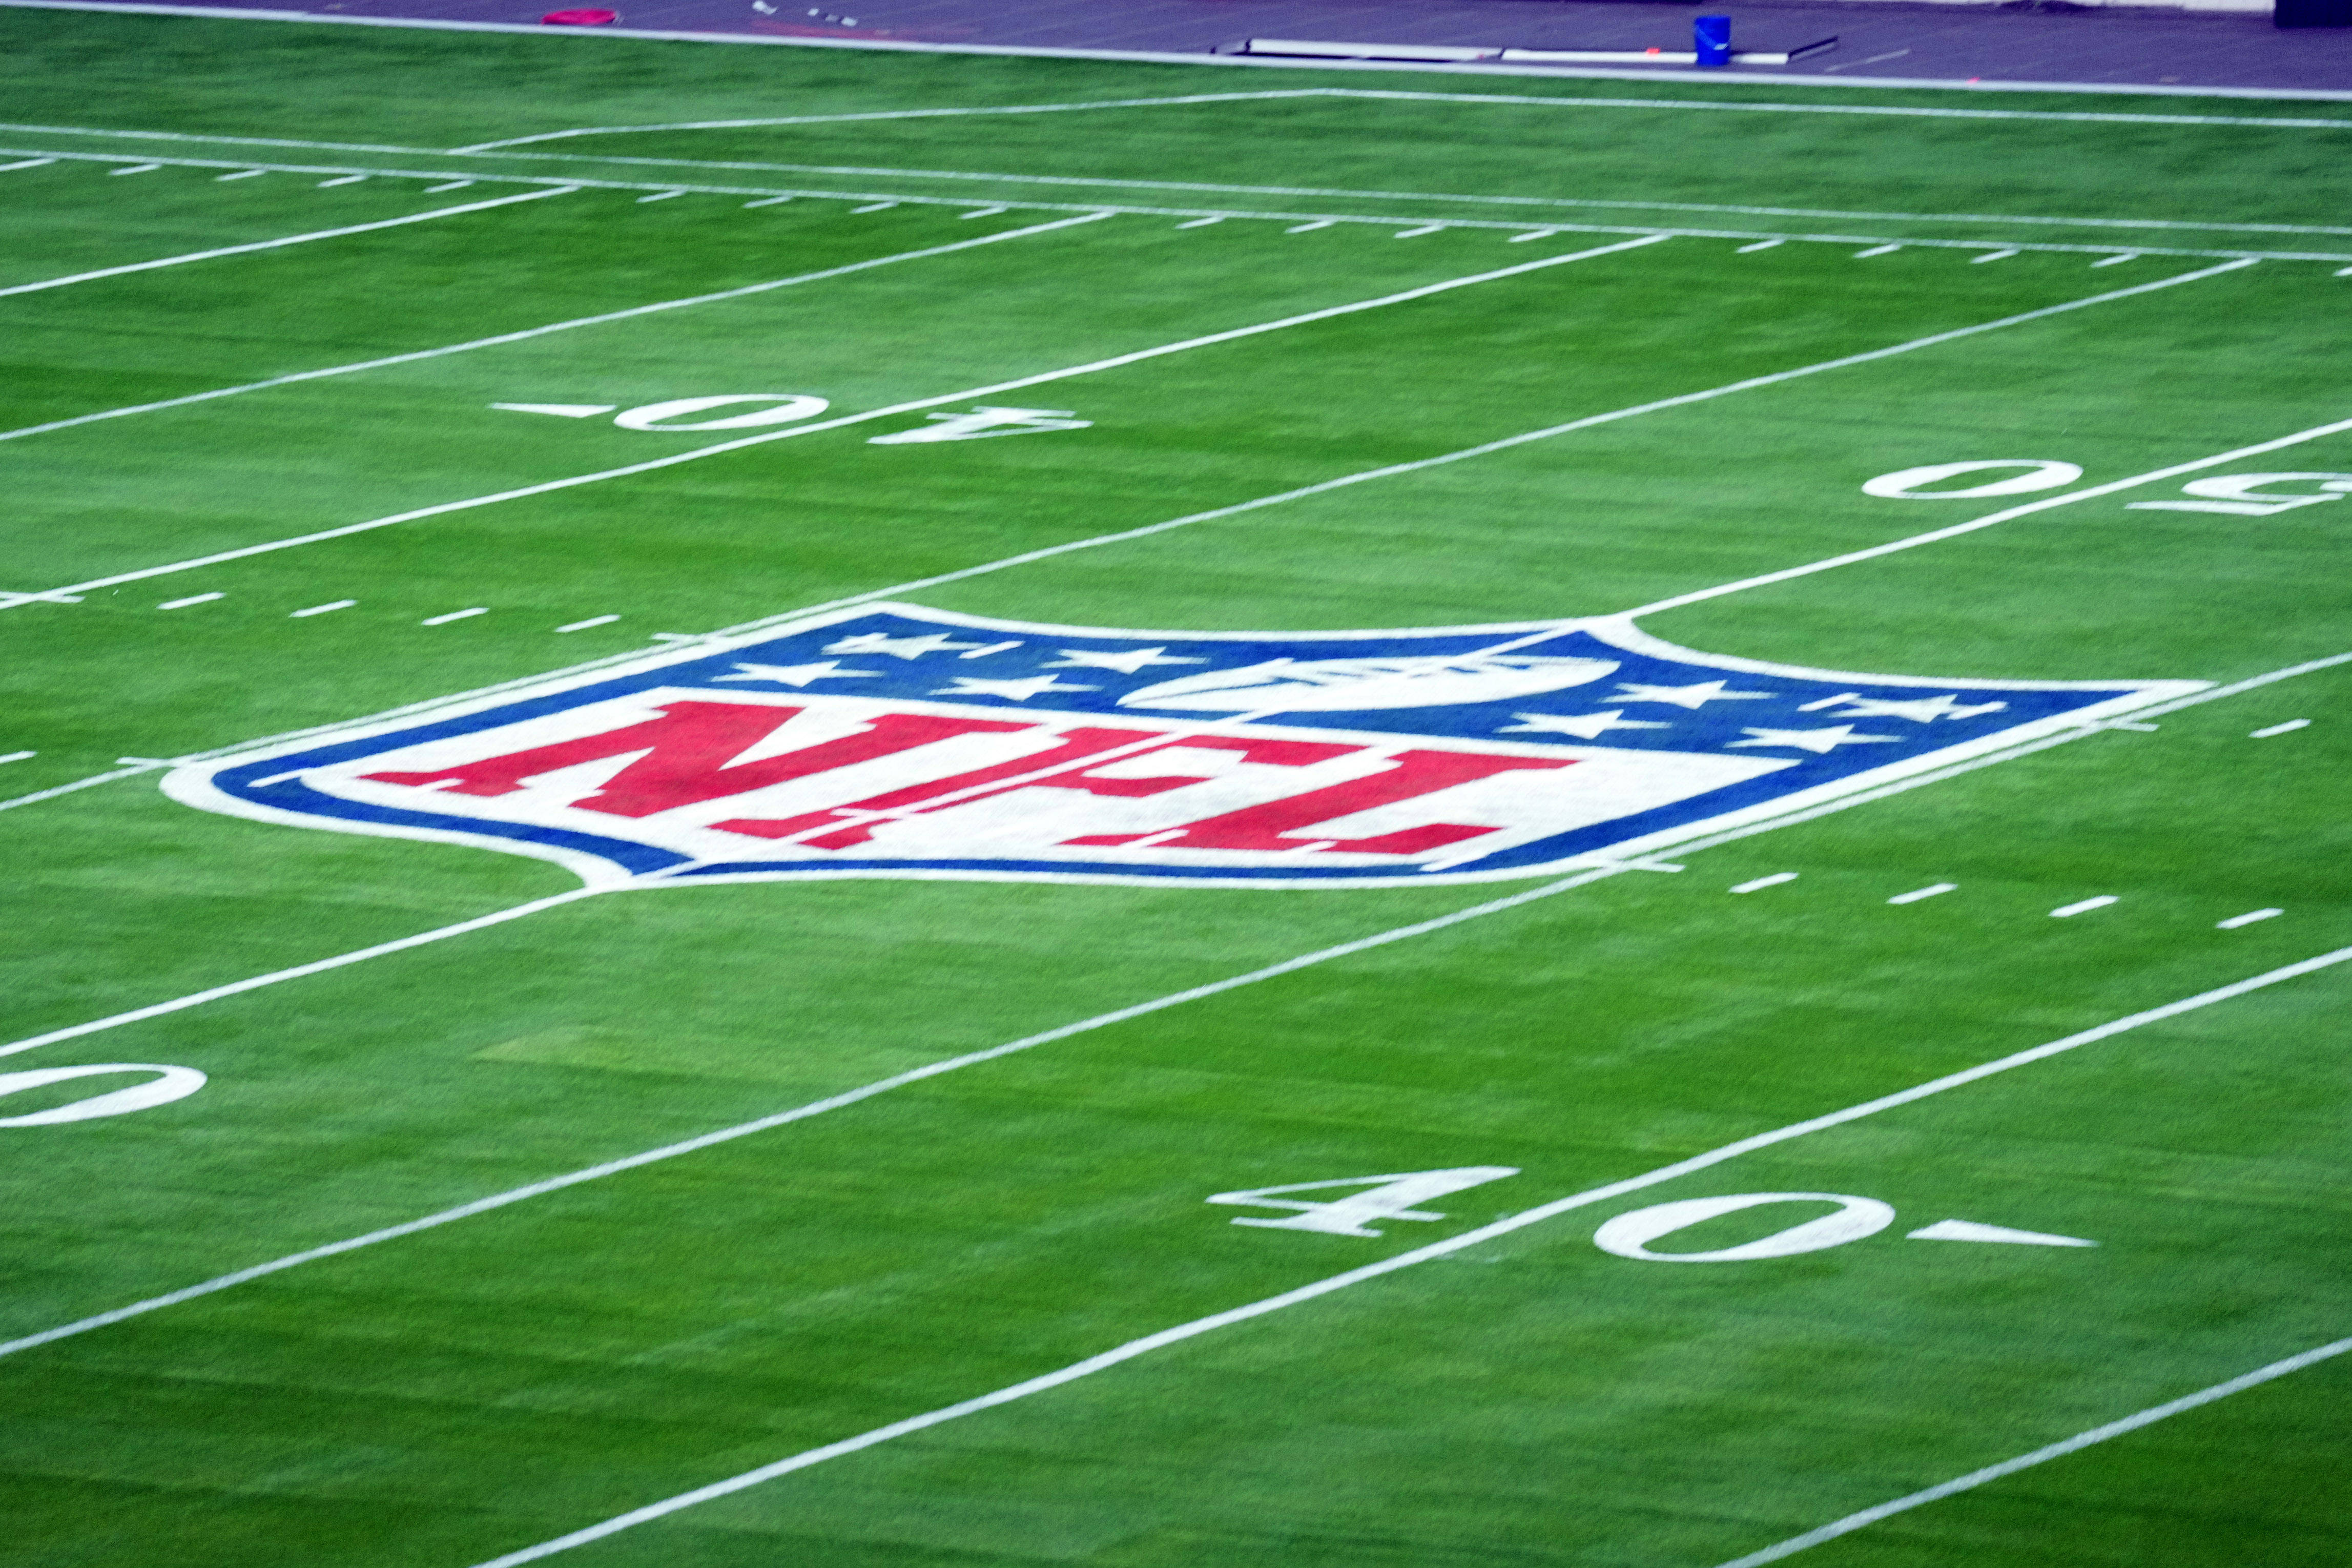 American Football Yard Lines, End Zone, Hash Marks